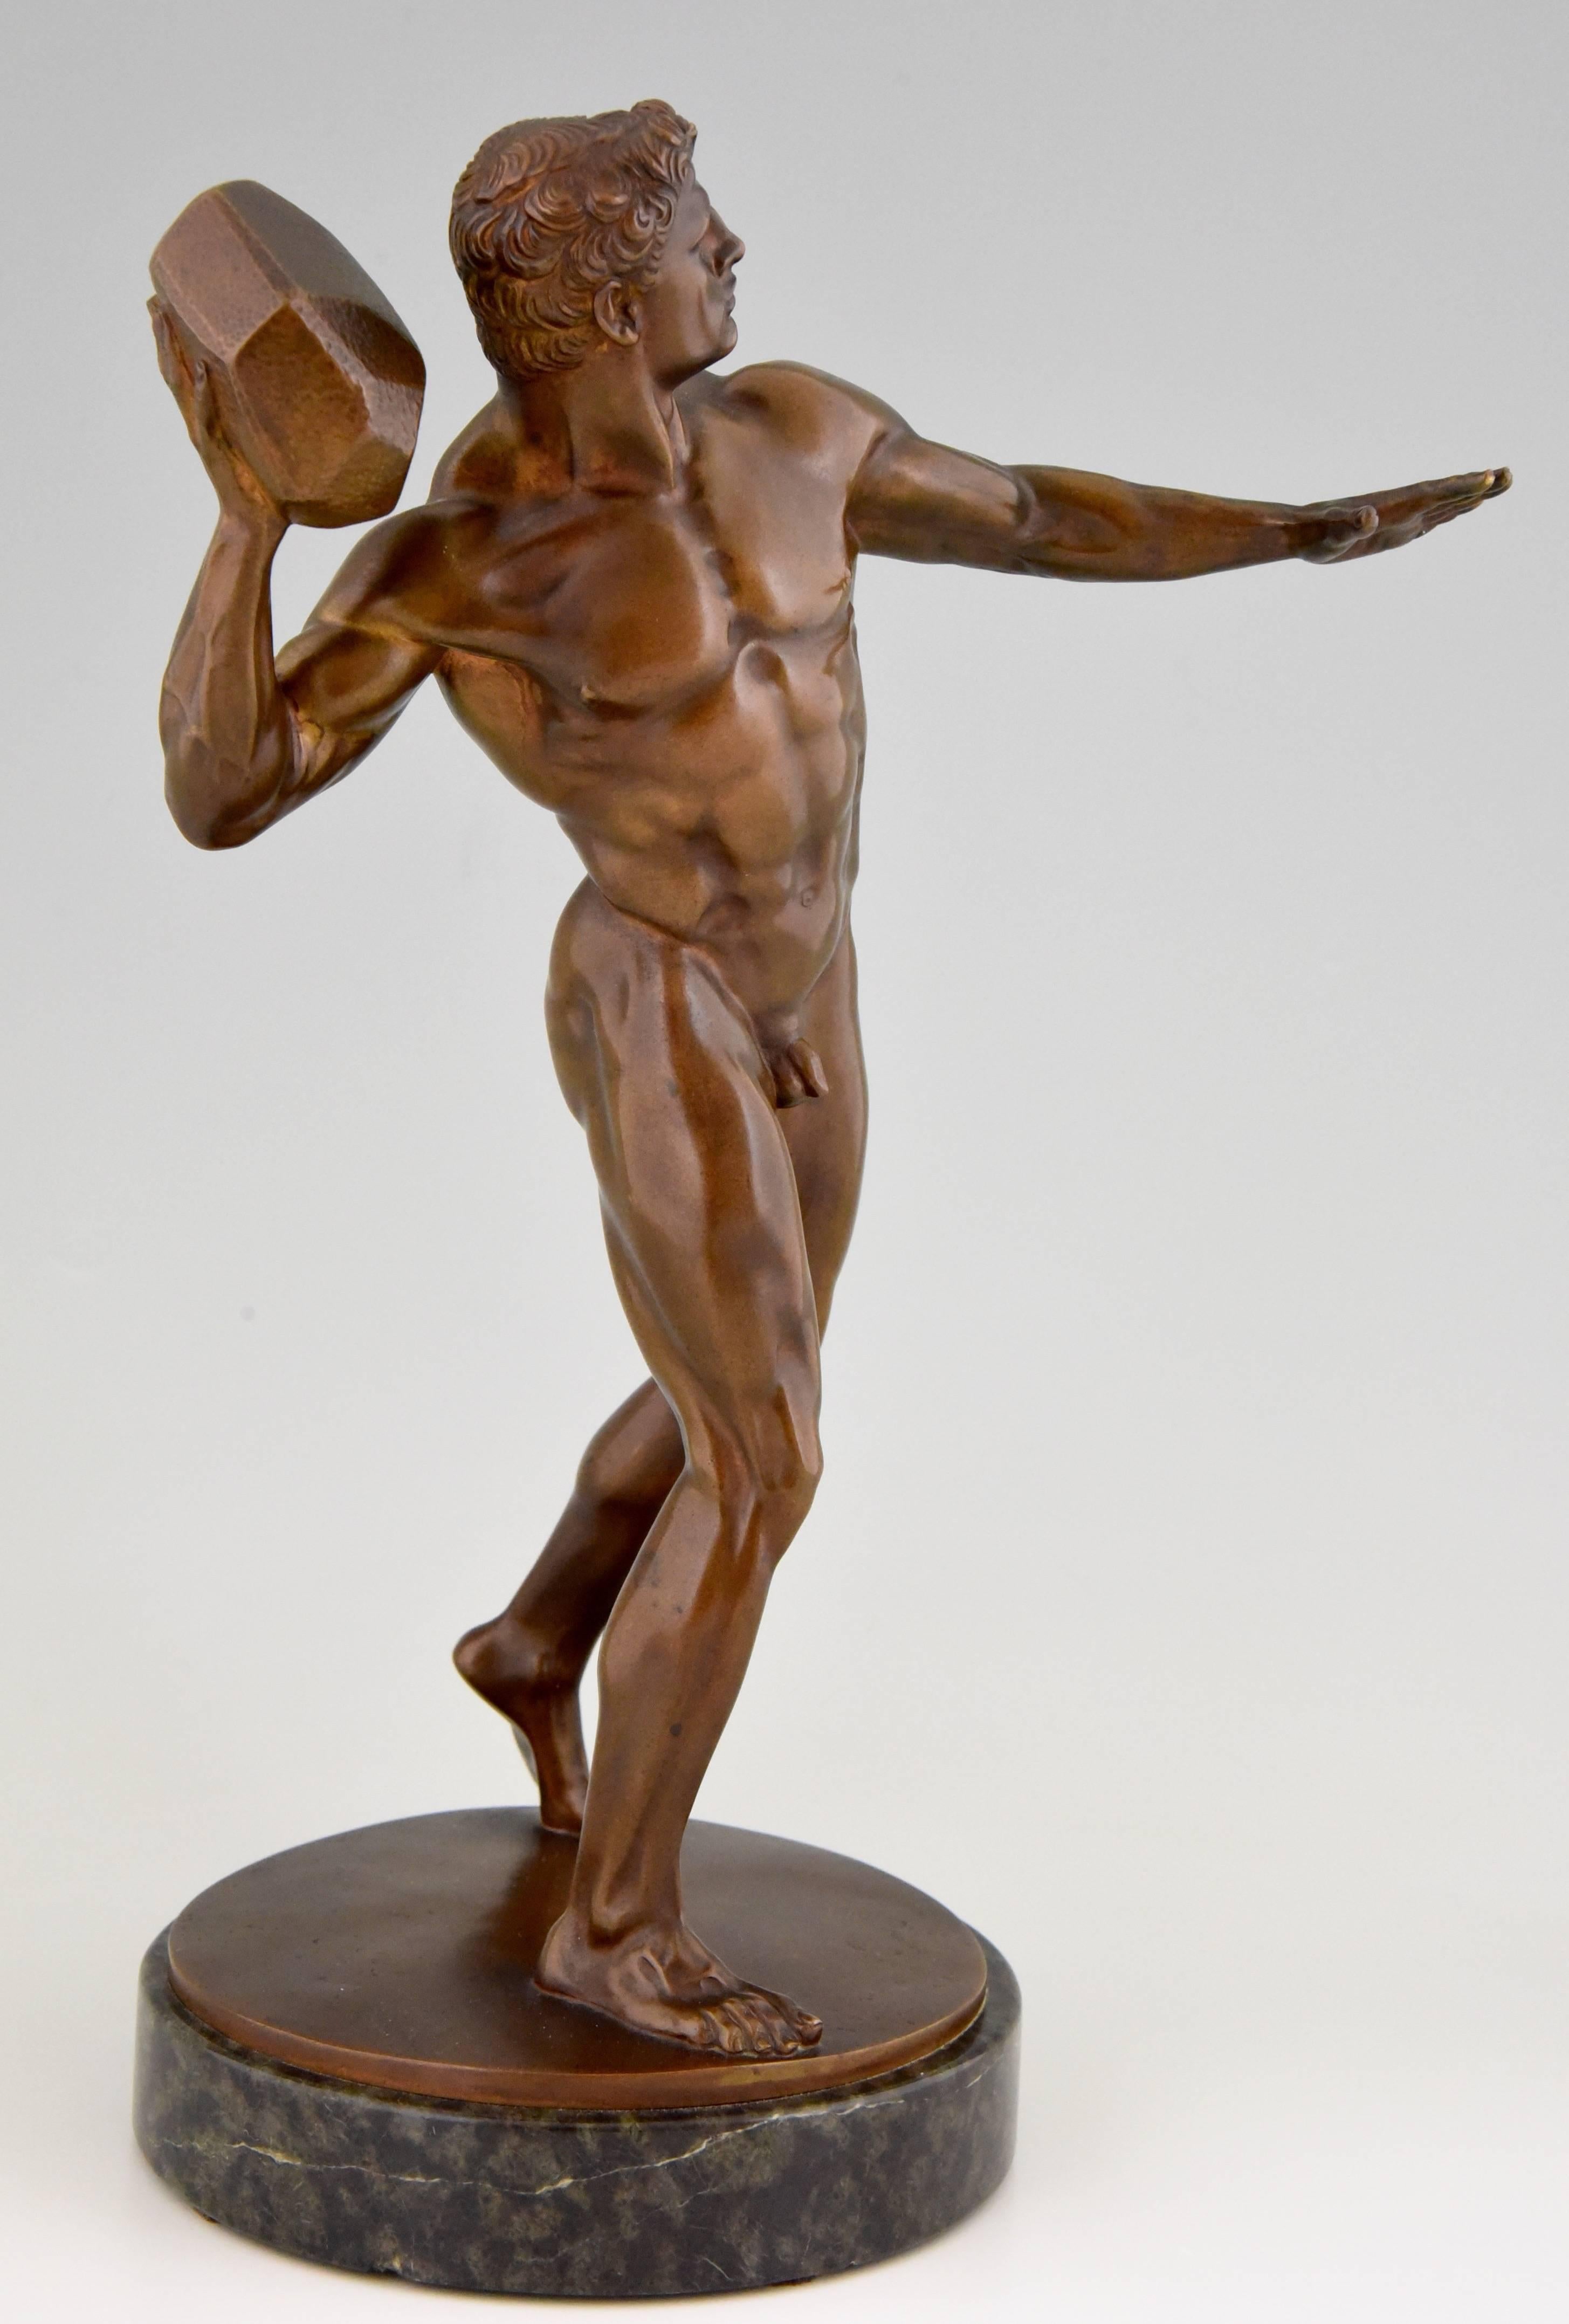 Antique sculpture of a male nude throwing a stone by the Swiss artist Hugo Siegwart (1865-1938) He worked in Germany and France. 

Artist / Maker:
Hugo Siegwart
Signature / Marks:
Unsigned.
Style:
Romantic..
Date:
1900. 
Material:
Bronze